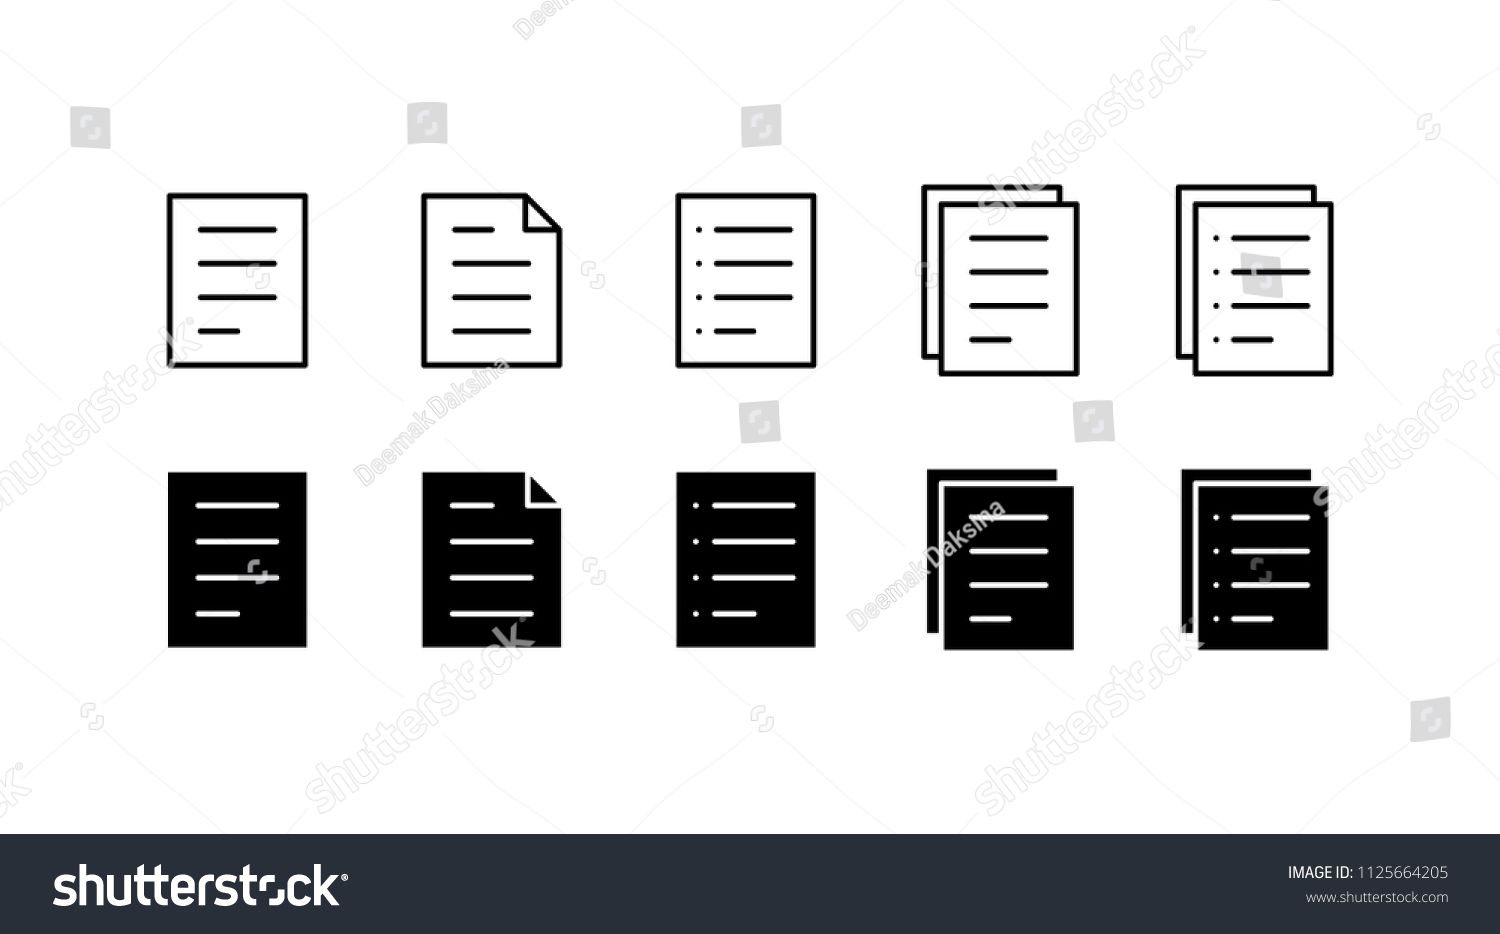 Text,Font,Line,Icon,Diagram,Black-and-white,Style,Illustration